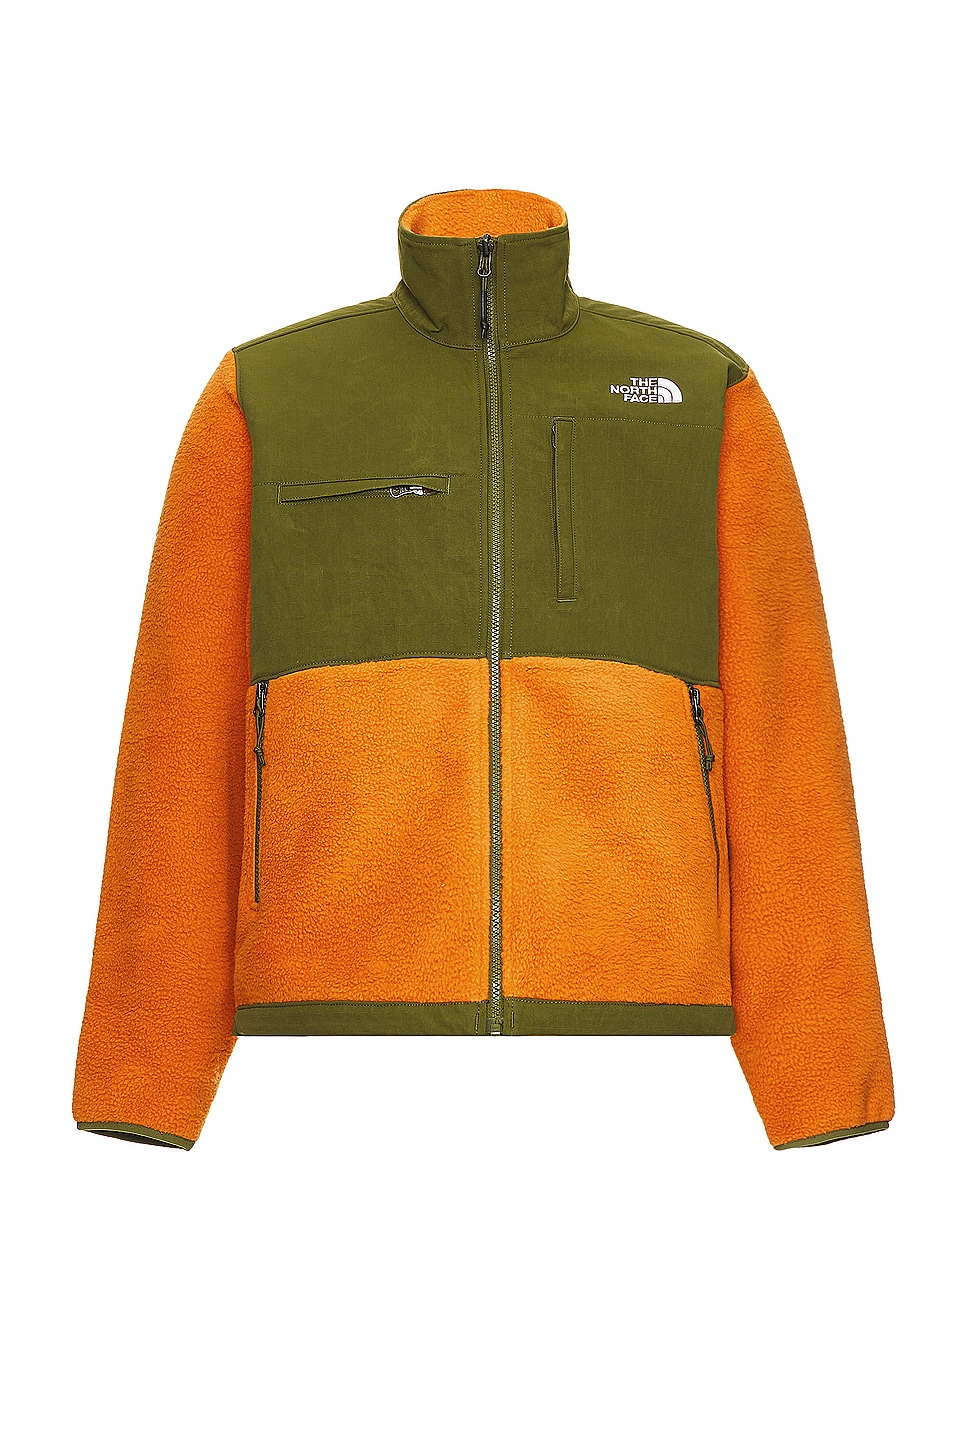 Image 1 of The North Face Ripstop Denali Jacket in Desert Rust & Forest Olive